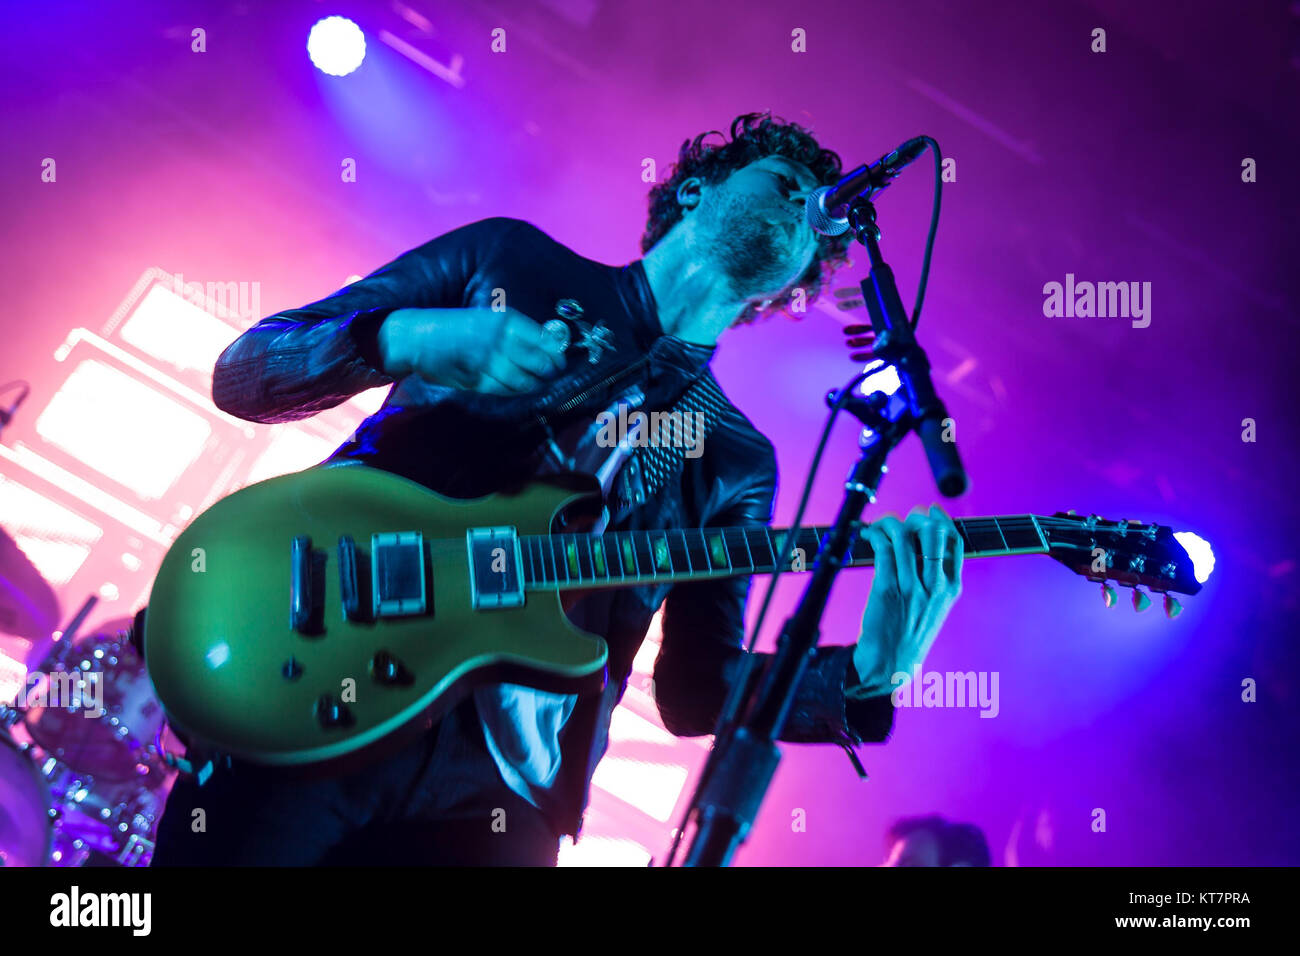 The English indie rock band The Kooks performs a live concert at Sentrum Scenen in Oslo. Here musician, singer and songwriter Luke Pritchard is seen live on stage. Norway, 10/02 2015. Stock Photo